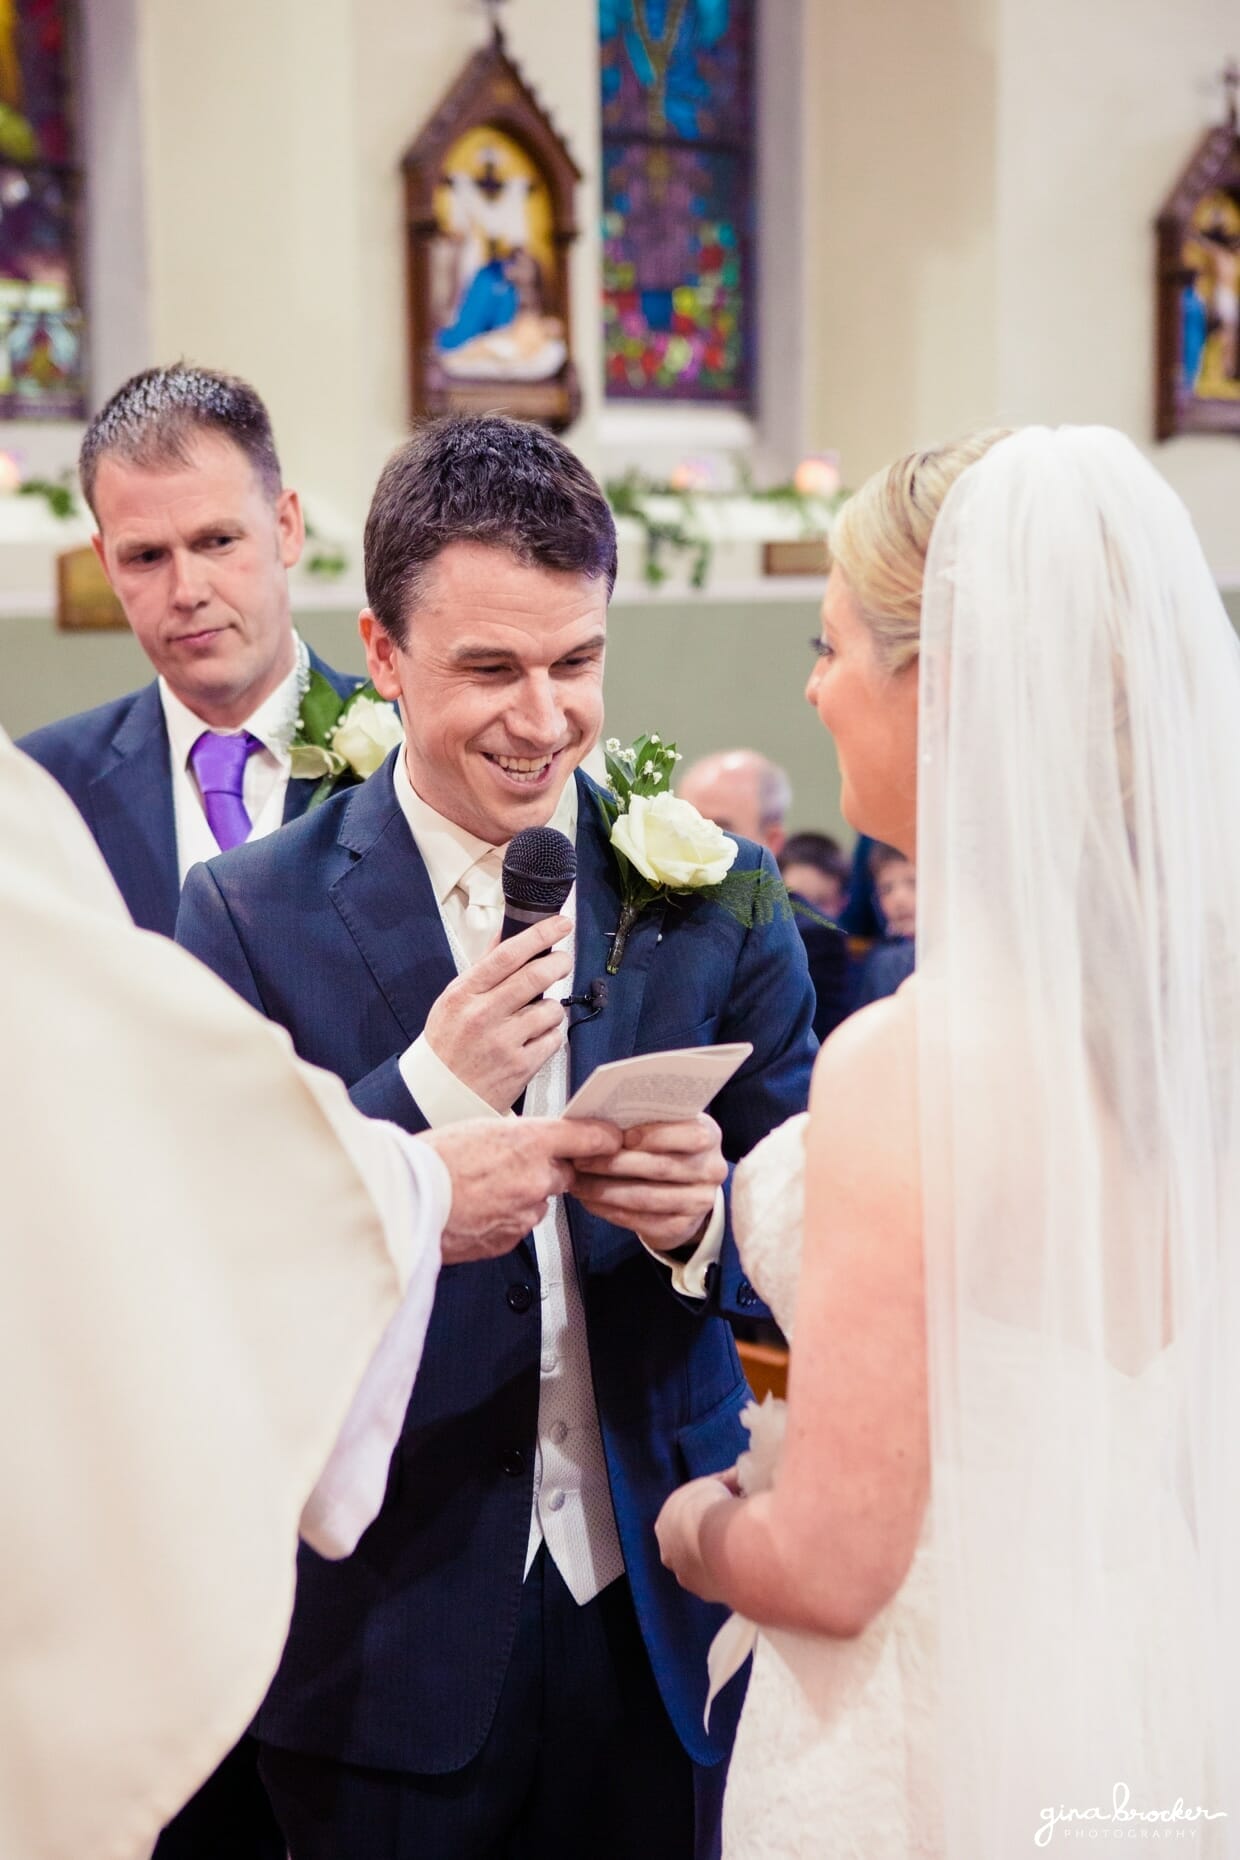 The groom smiles while saying his personal wedding vows to his wife during their religious wedding ceremony in a quaint church